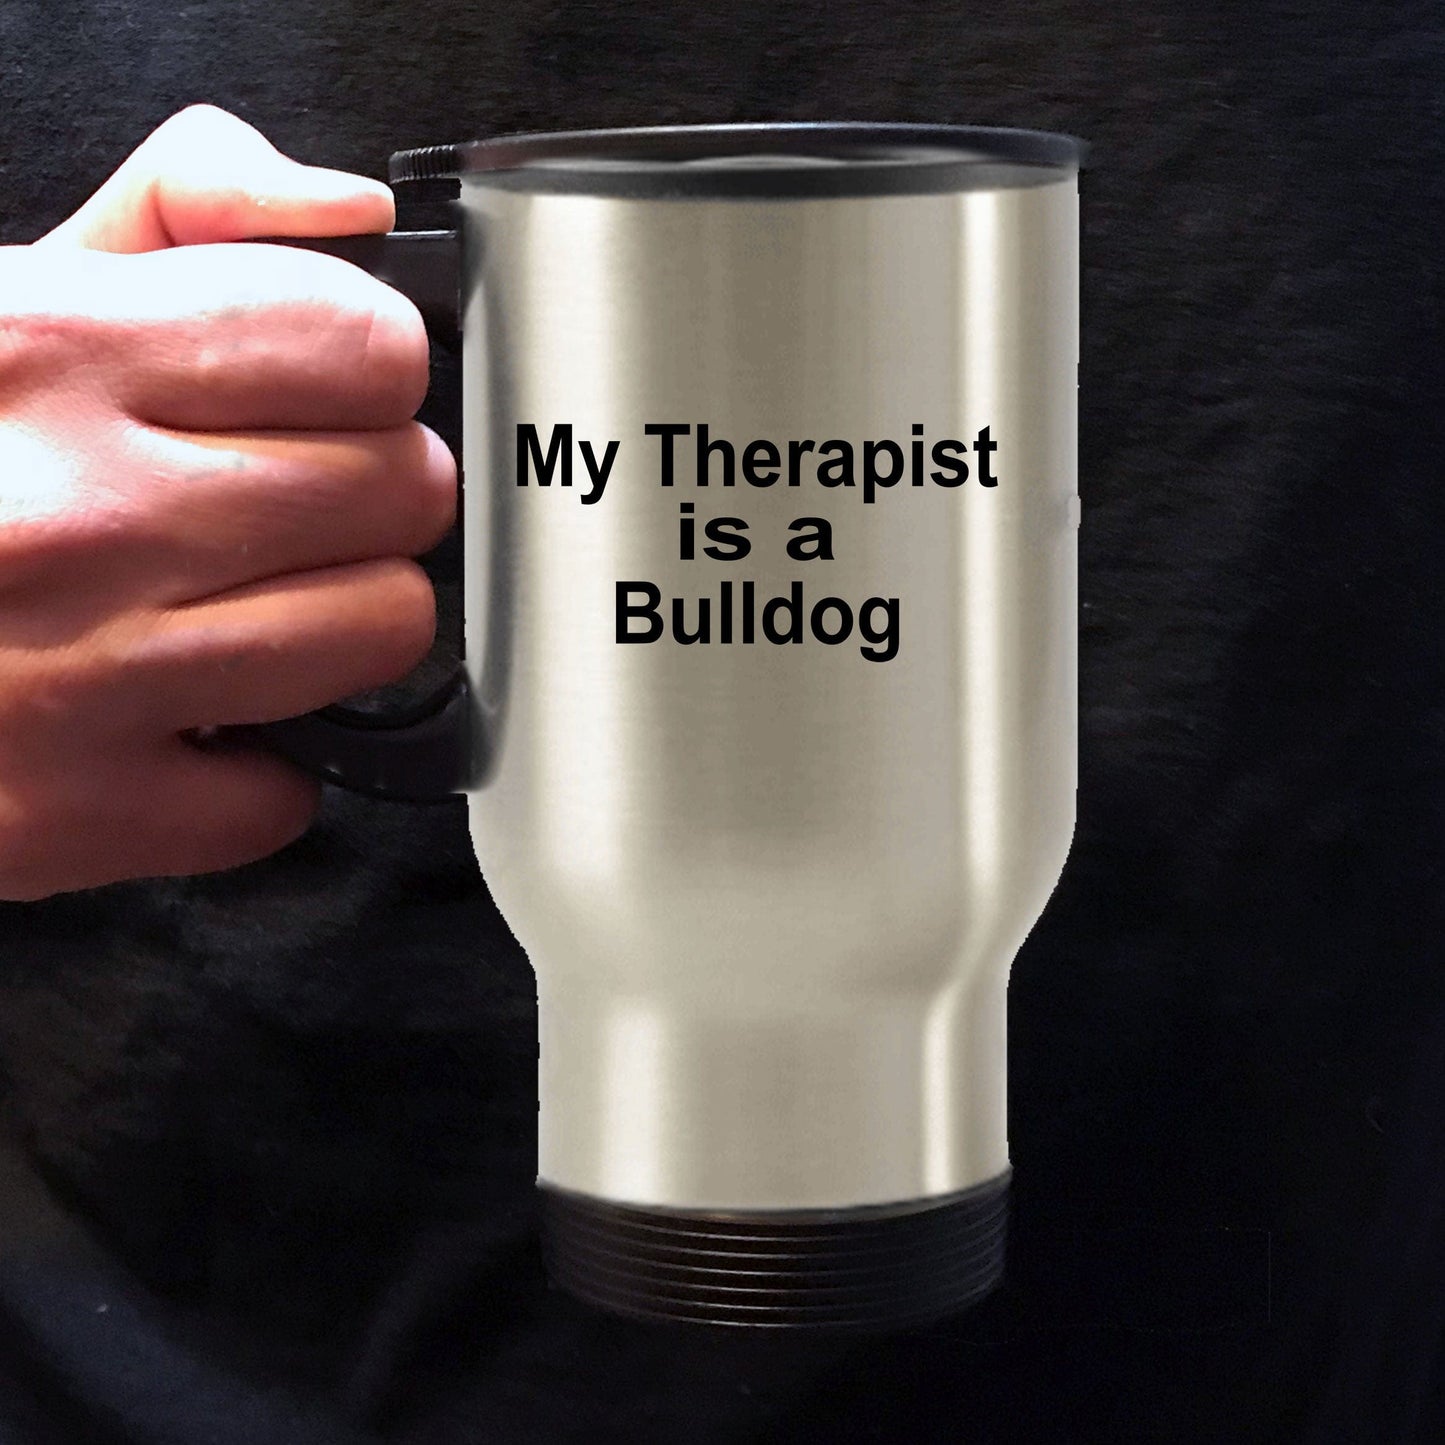 Bulldog Dog Lover Owner Gift Therapist Stainless Steel Insulated Travel Coffee Mug